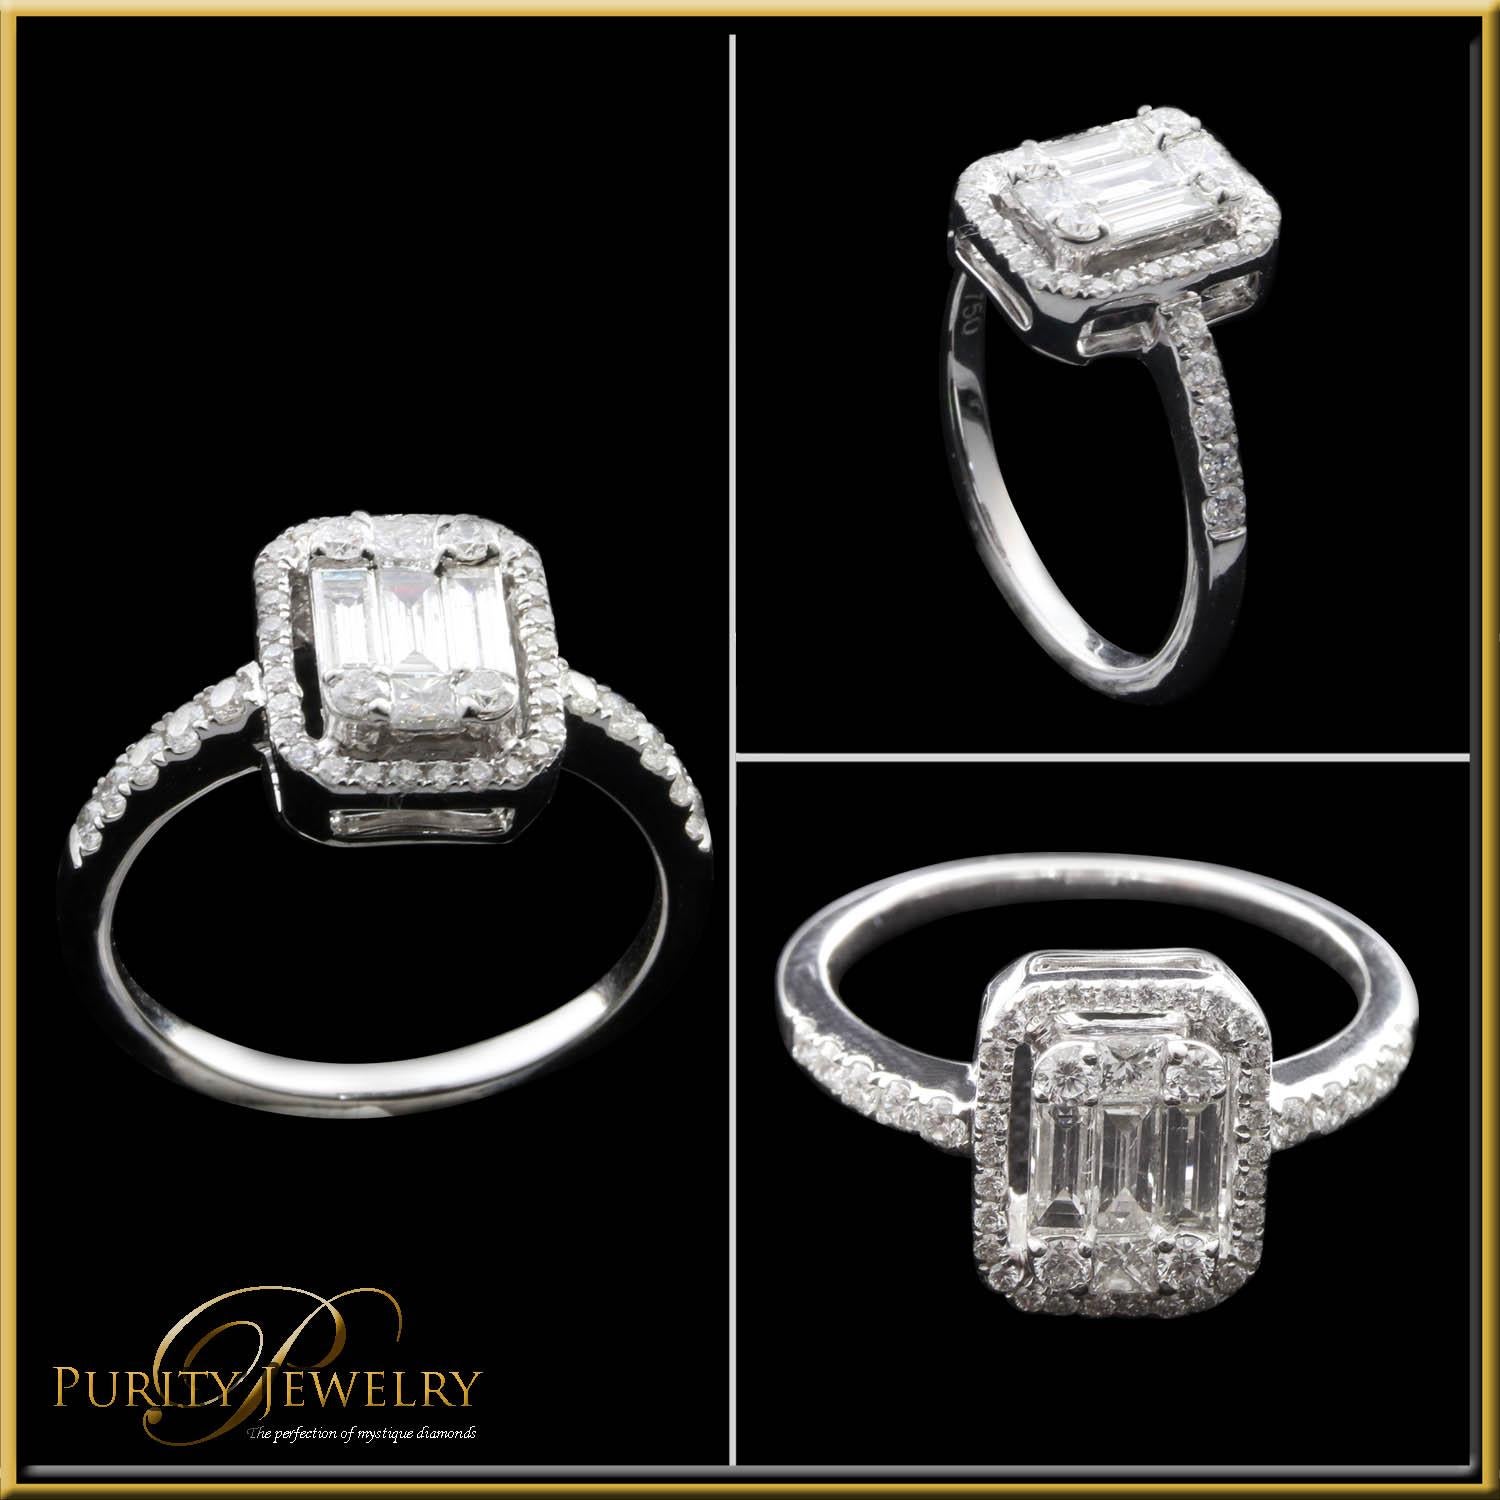 For Sale:  1ct Emerald Cut Diamond Illusion Engagement Ring Set in 18kt Gold 4